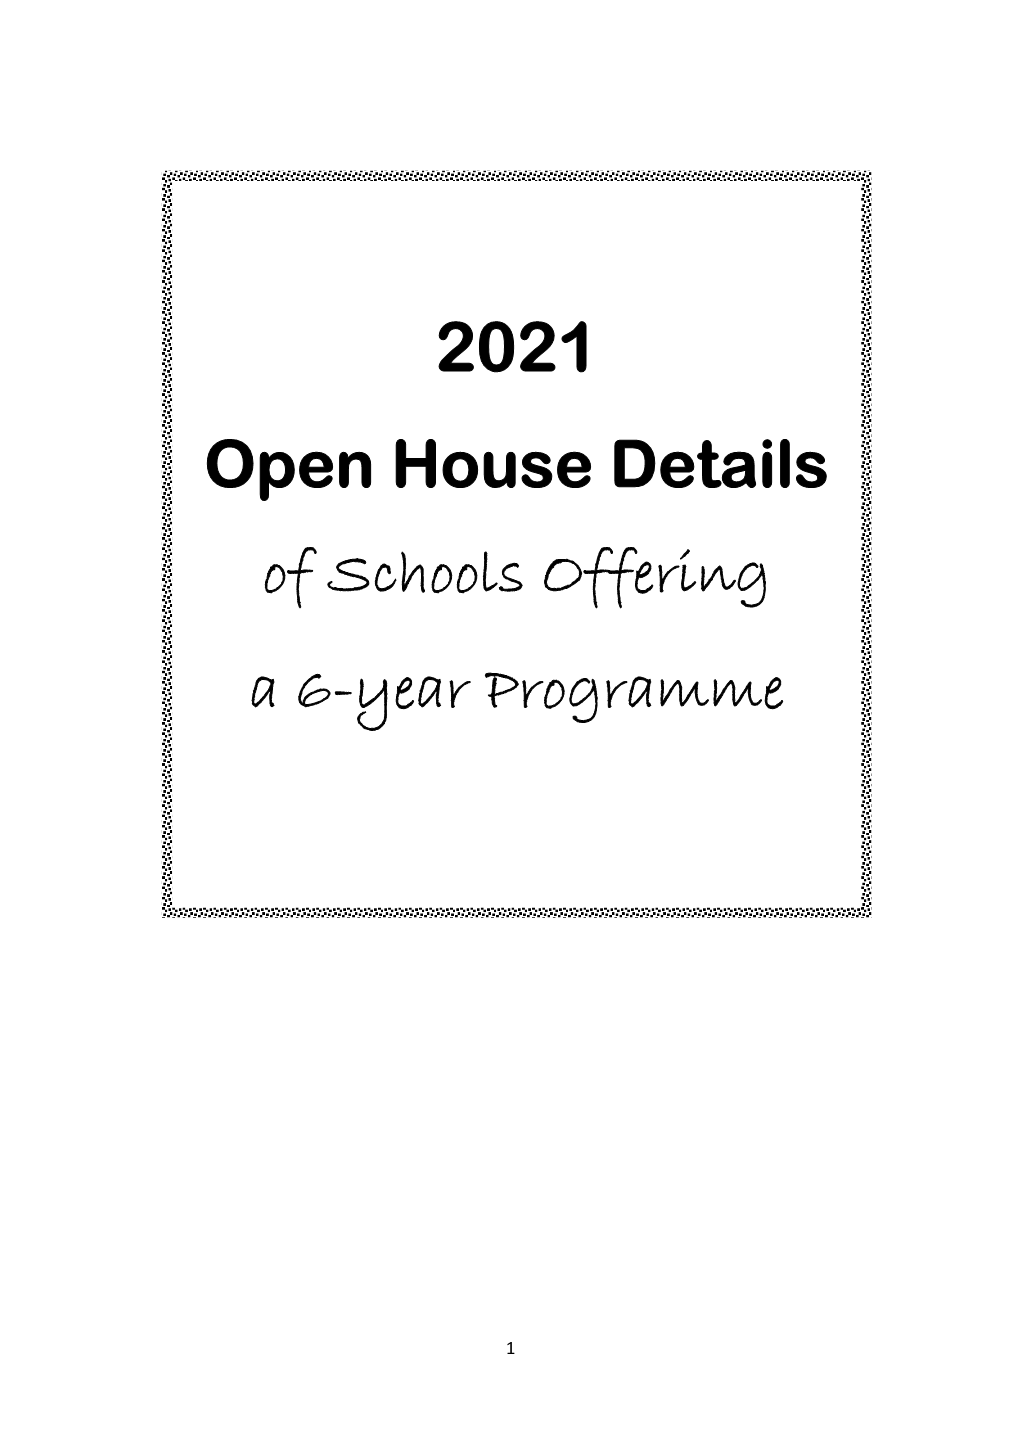 Open House Details of Schools Offering a 6-Year Programme